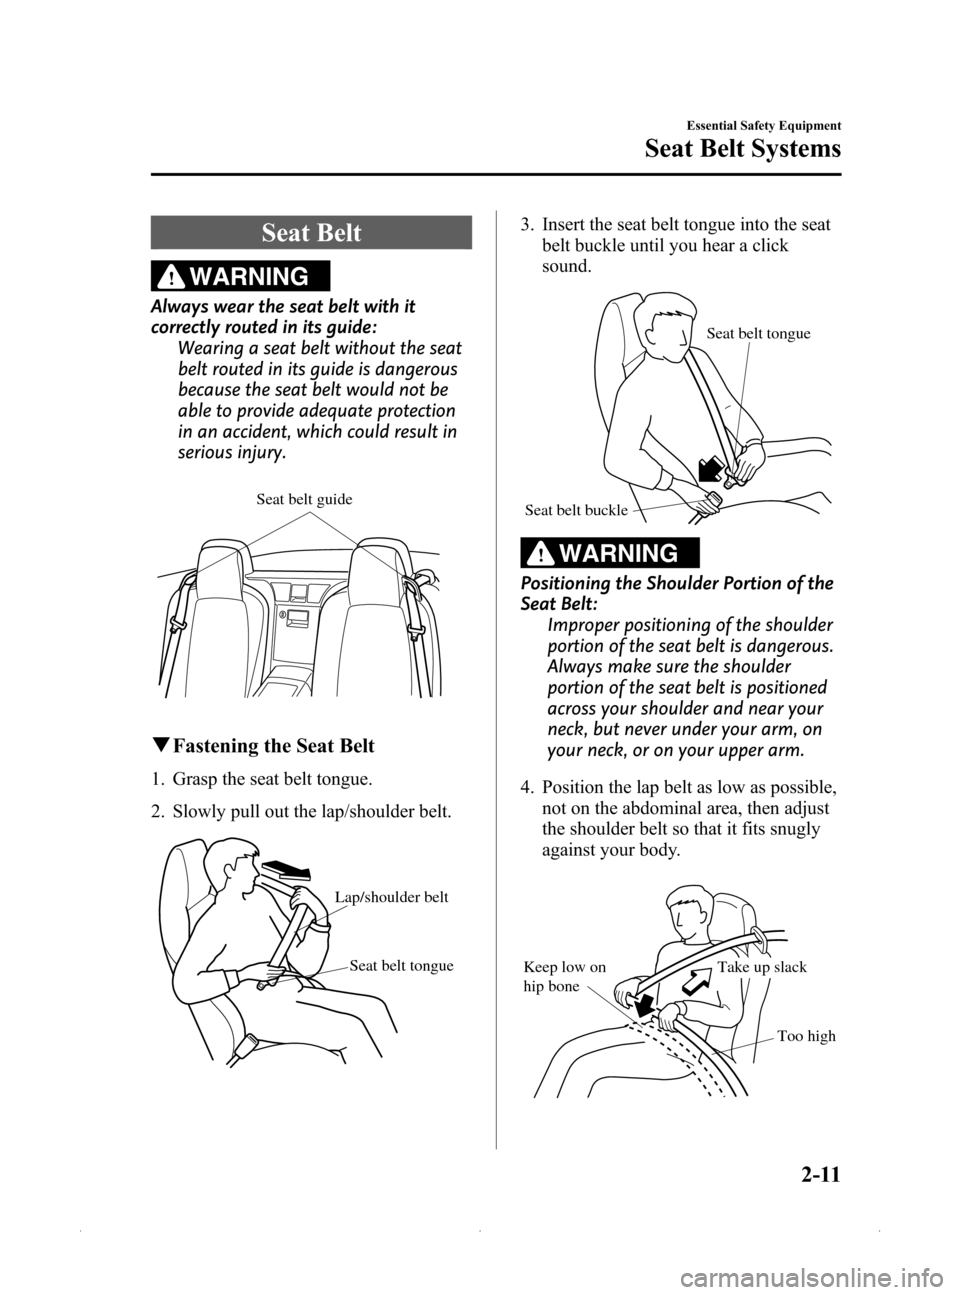 MAZDA MODEL MX-5 2015   (in English) Owners Manual Black plate (23,1)
Seat Belt
WARNING
Always wear the seat belt with it
correctly routed in its guide:Wearing a seat belt without the seat
belt routed in its guide is dangerous
because the seat belt wo